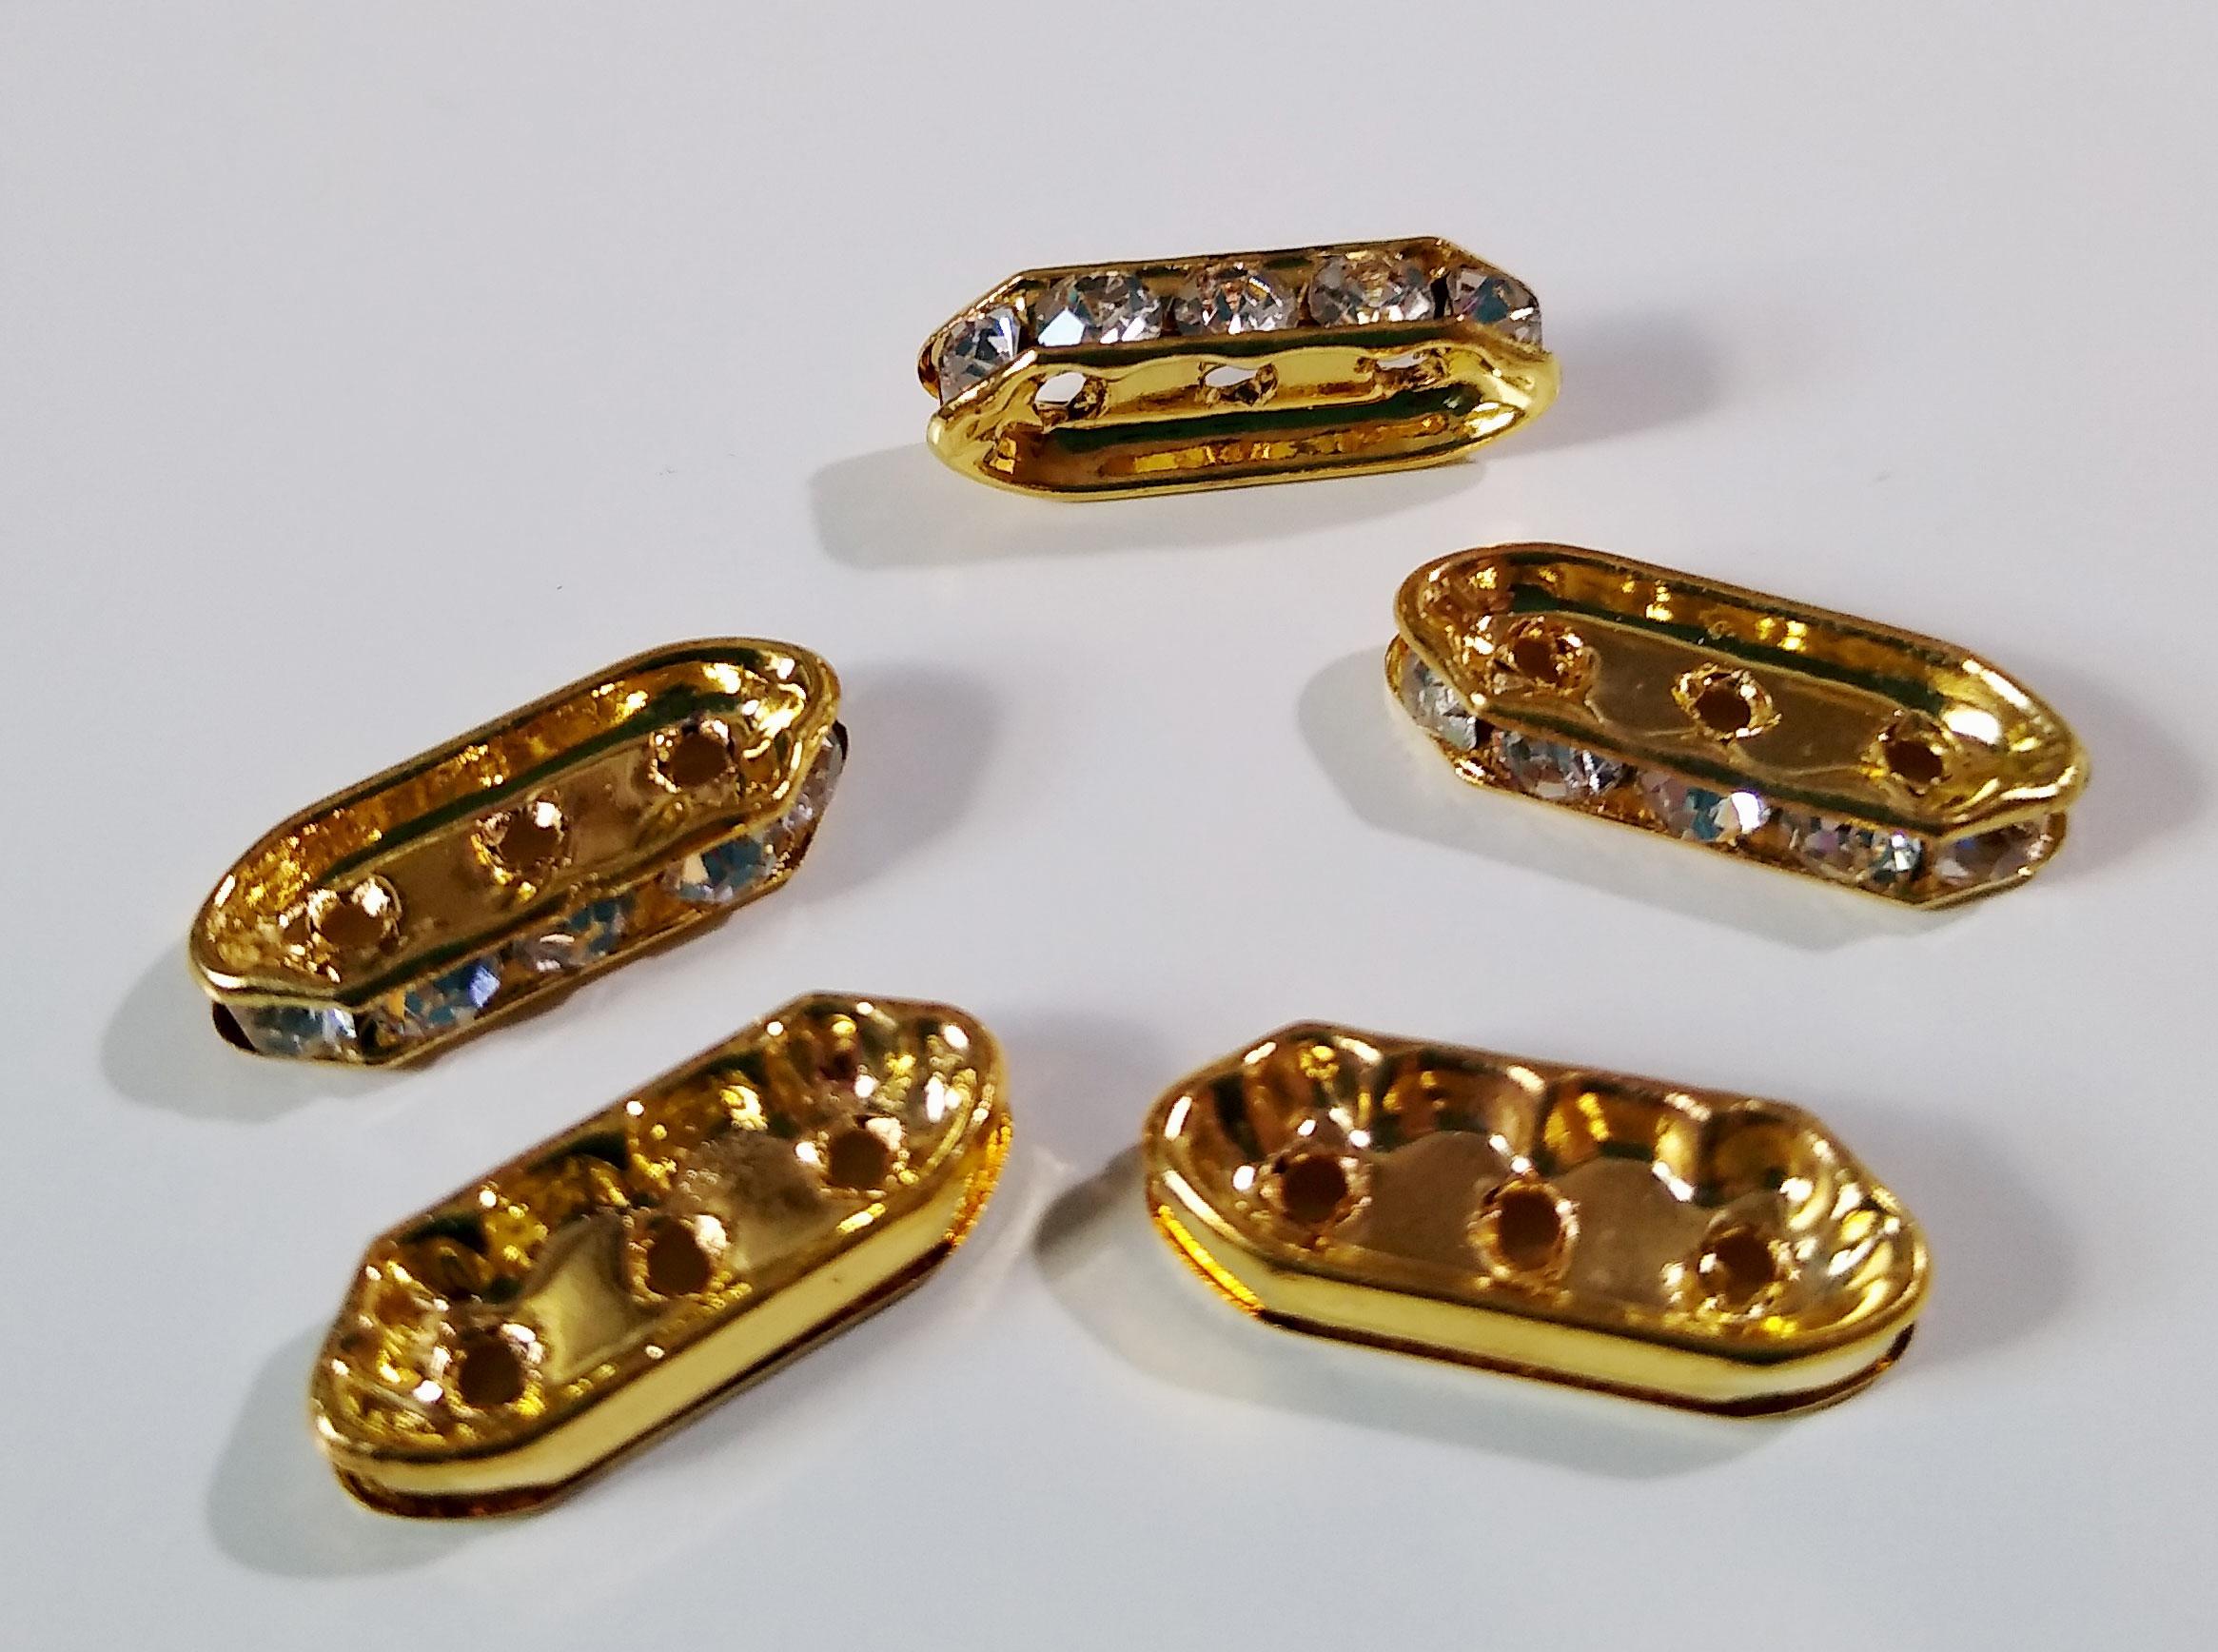 18mm 3 hole Spacer Bar - Gold Plated with Rhinestones